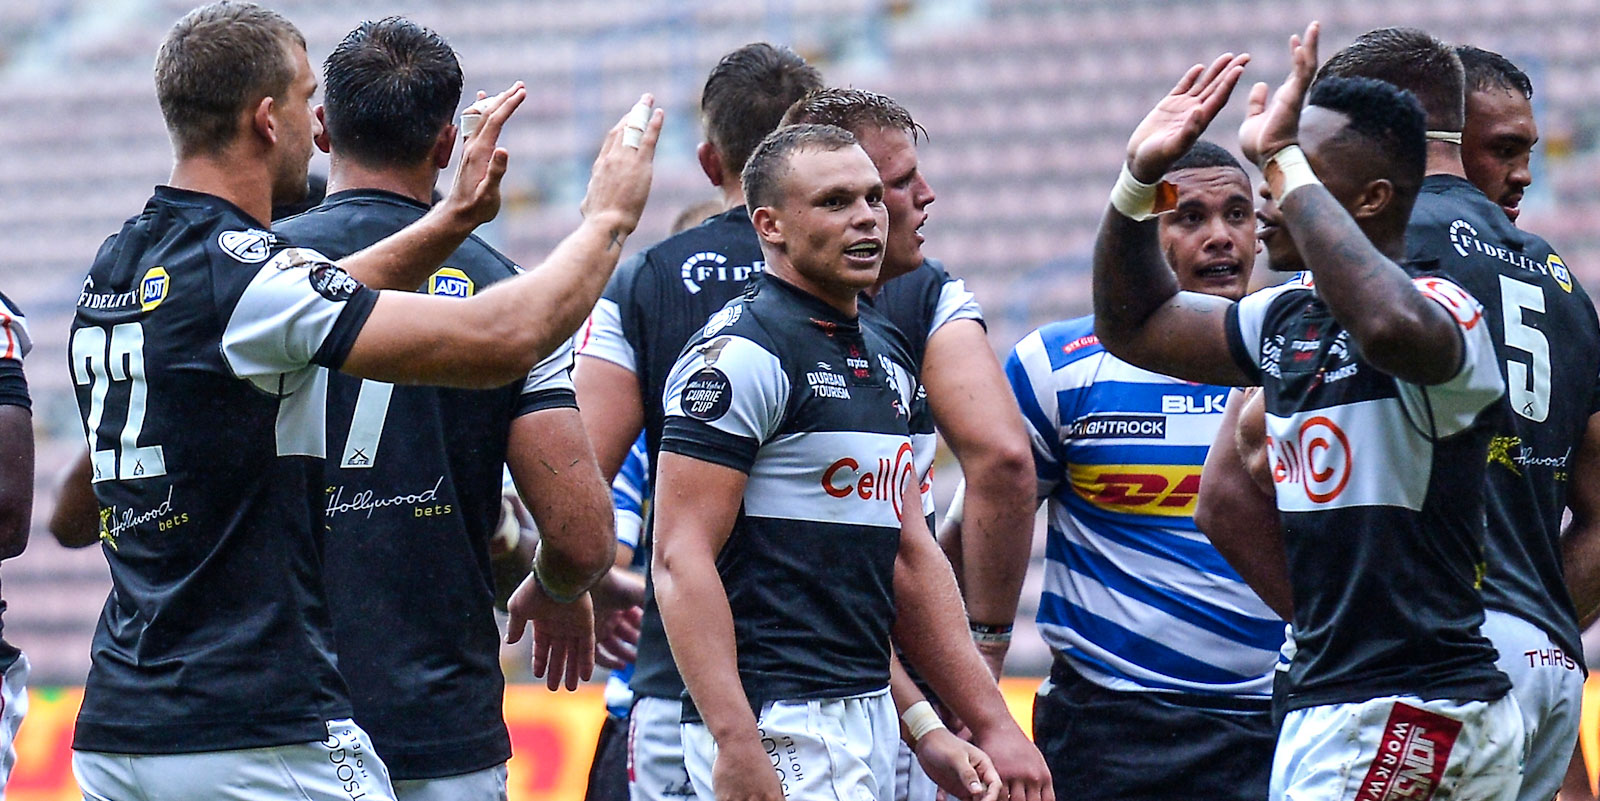 Curwin Bosch is back at flyhalf for the Cell C Sharks.